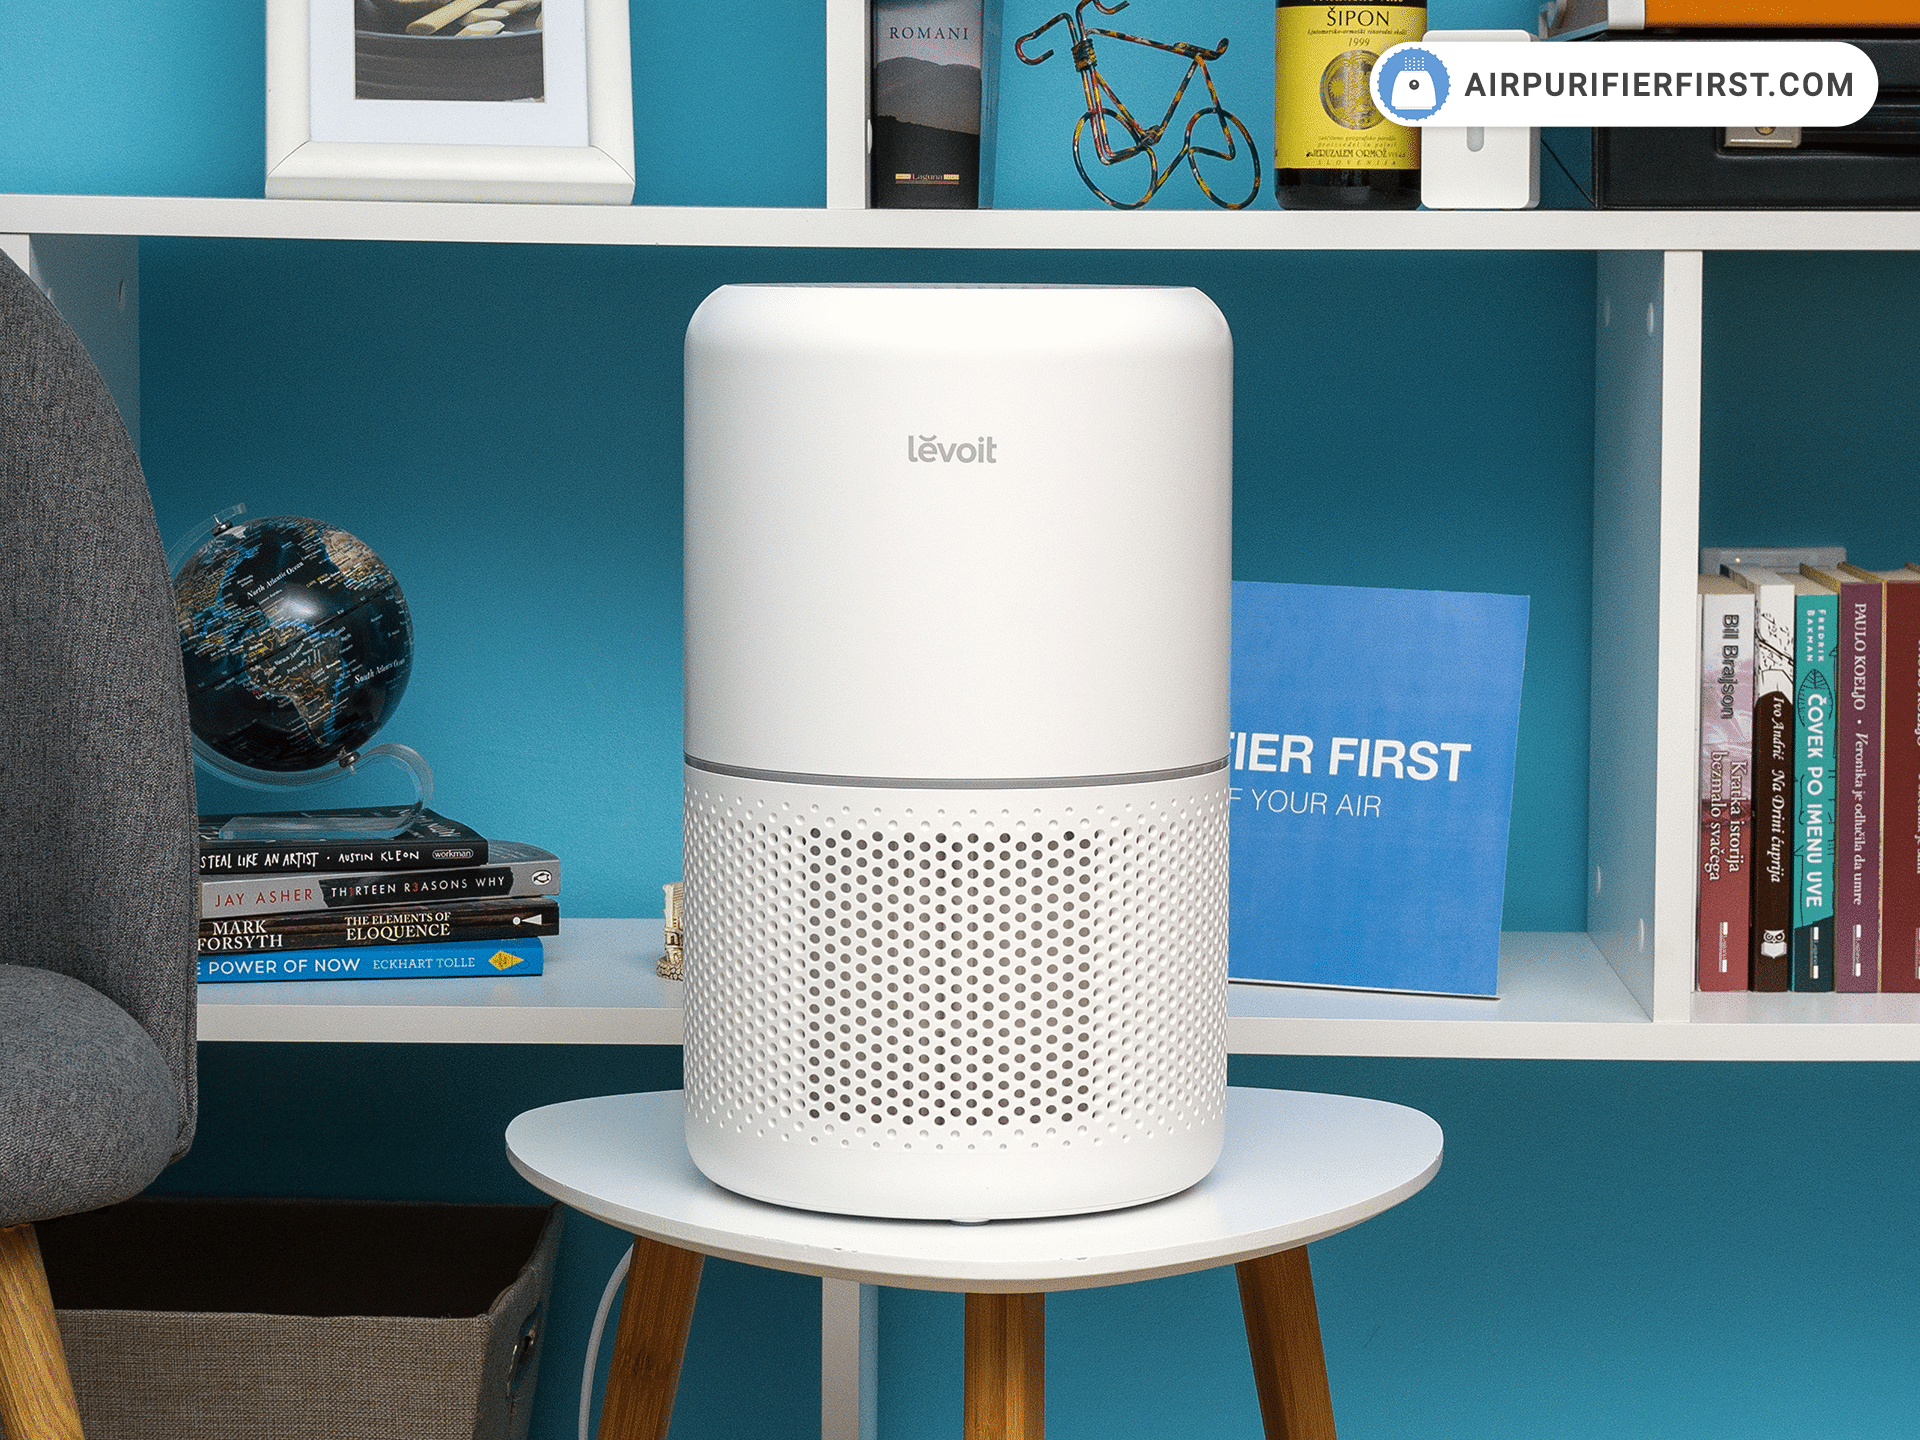  LEVOIT Air Purifiers for Home Large Room, Smart Control Air  Cleaner, Hepa Filter Captures Smoke, Pet Allergies, Dust, Mold, Odor and  Pollen for Bedroom, Sleep and Auto Mode, Energy Star, LV-PUR131S 